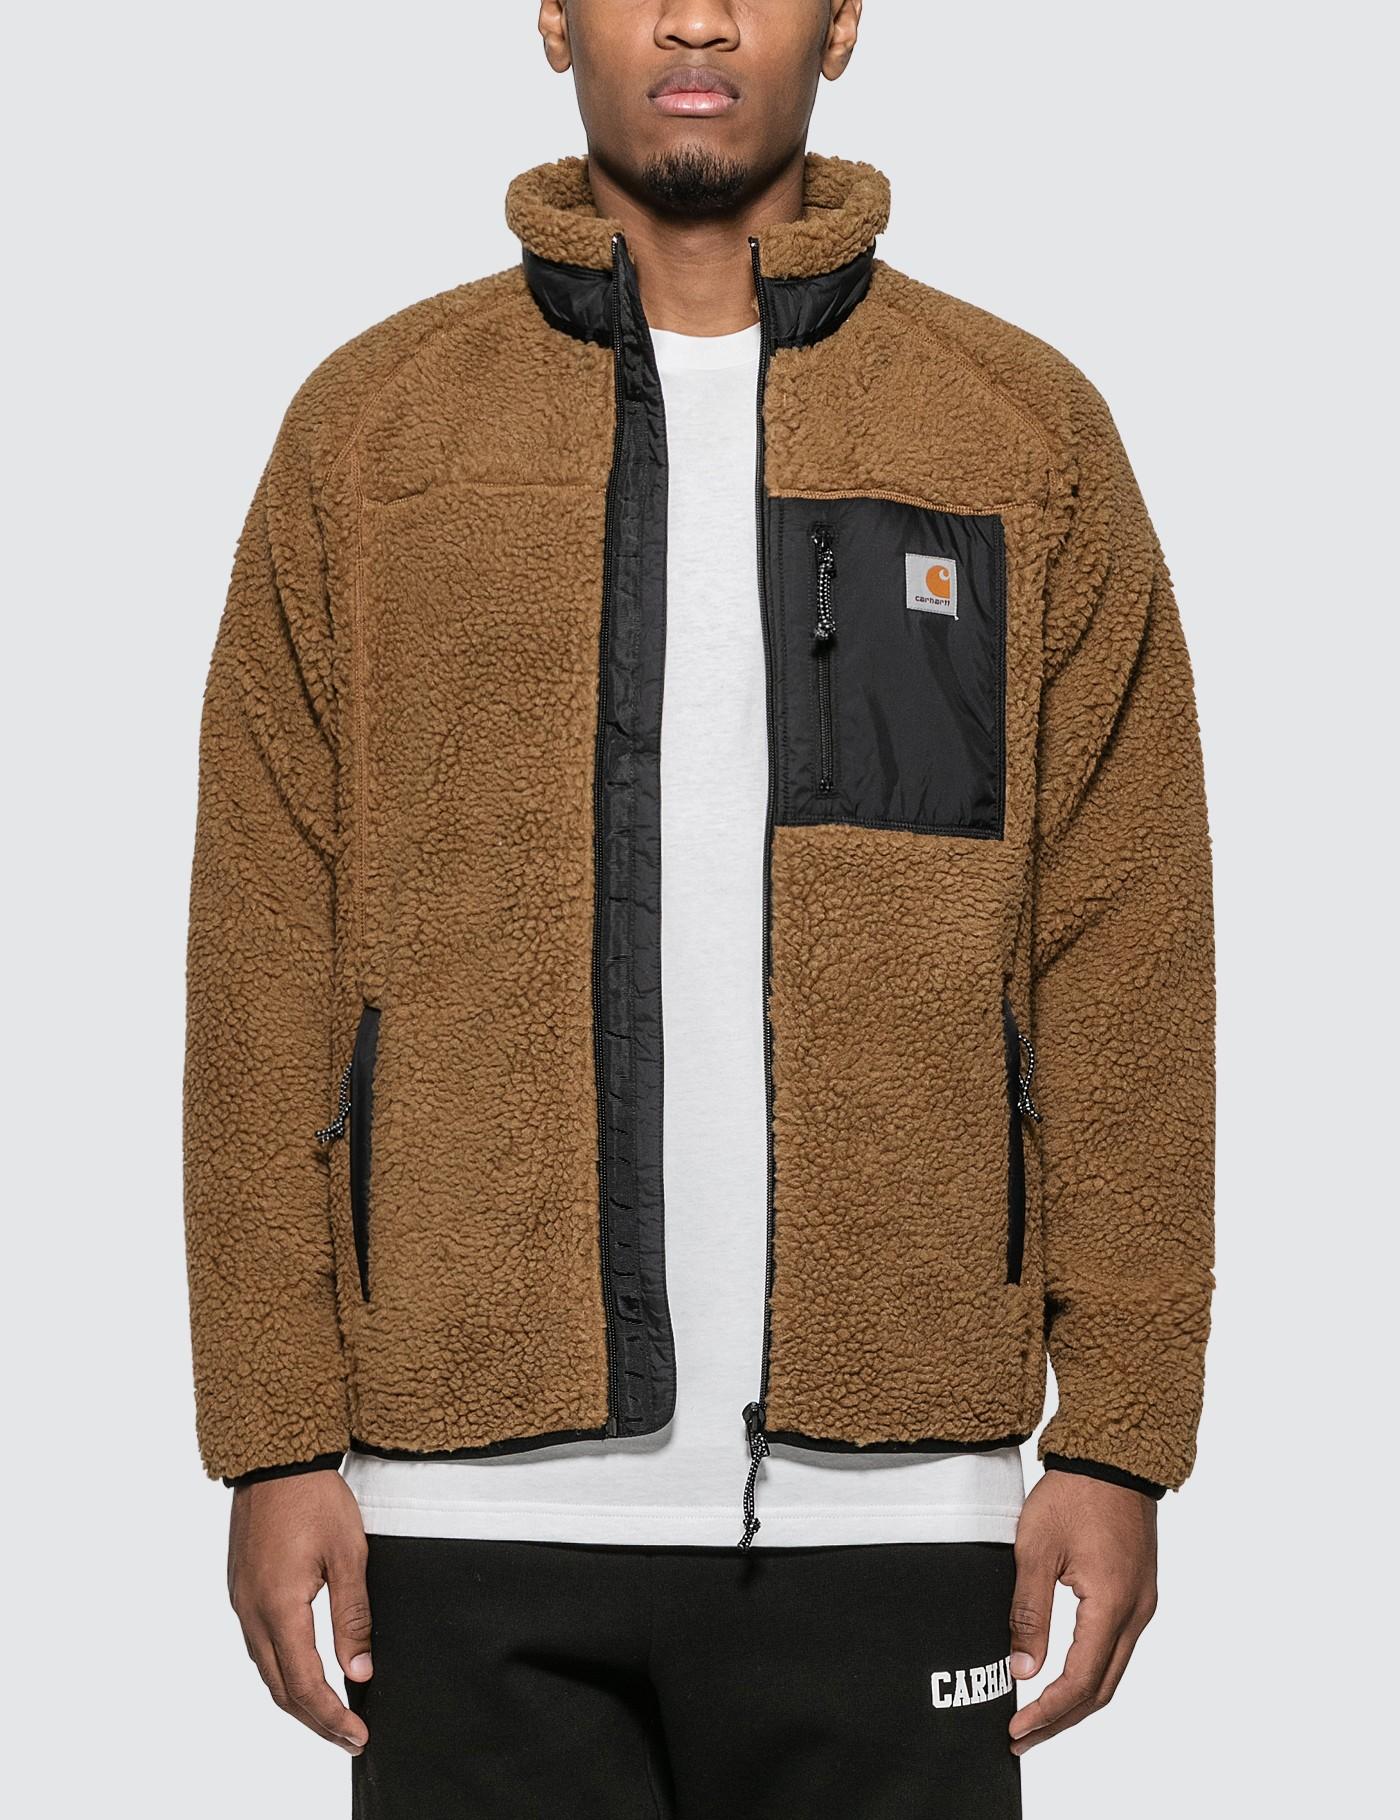 Carhartt WIP Synthetic Scout Liner Jacket in Brown for Men - Lyst